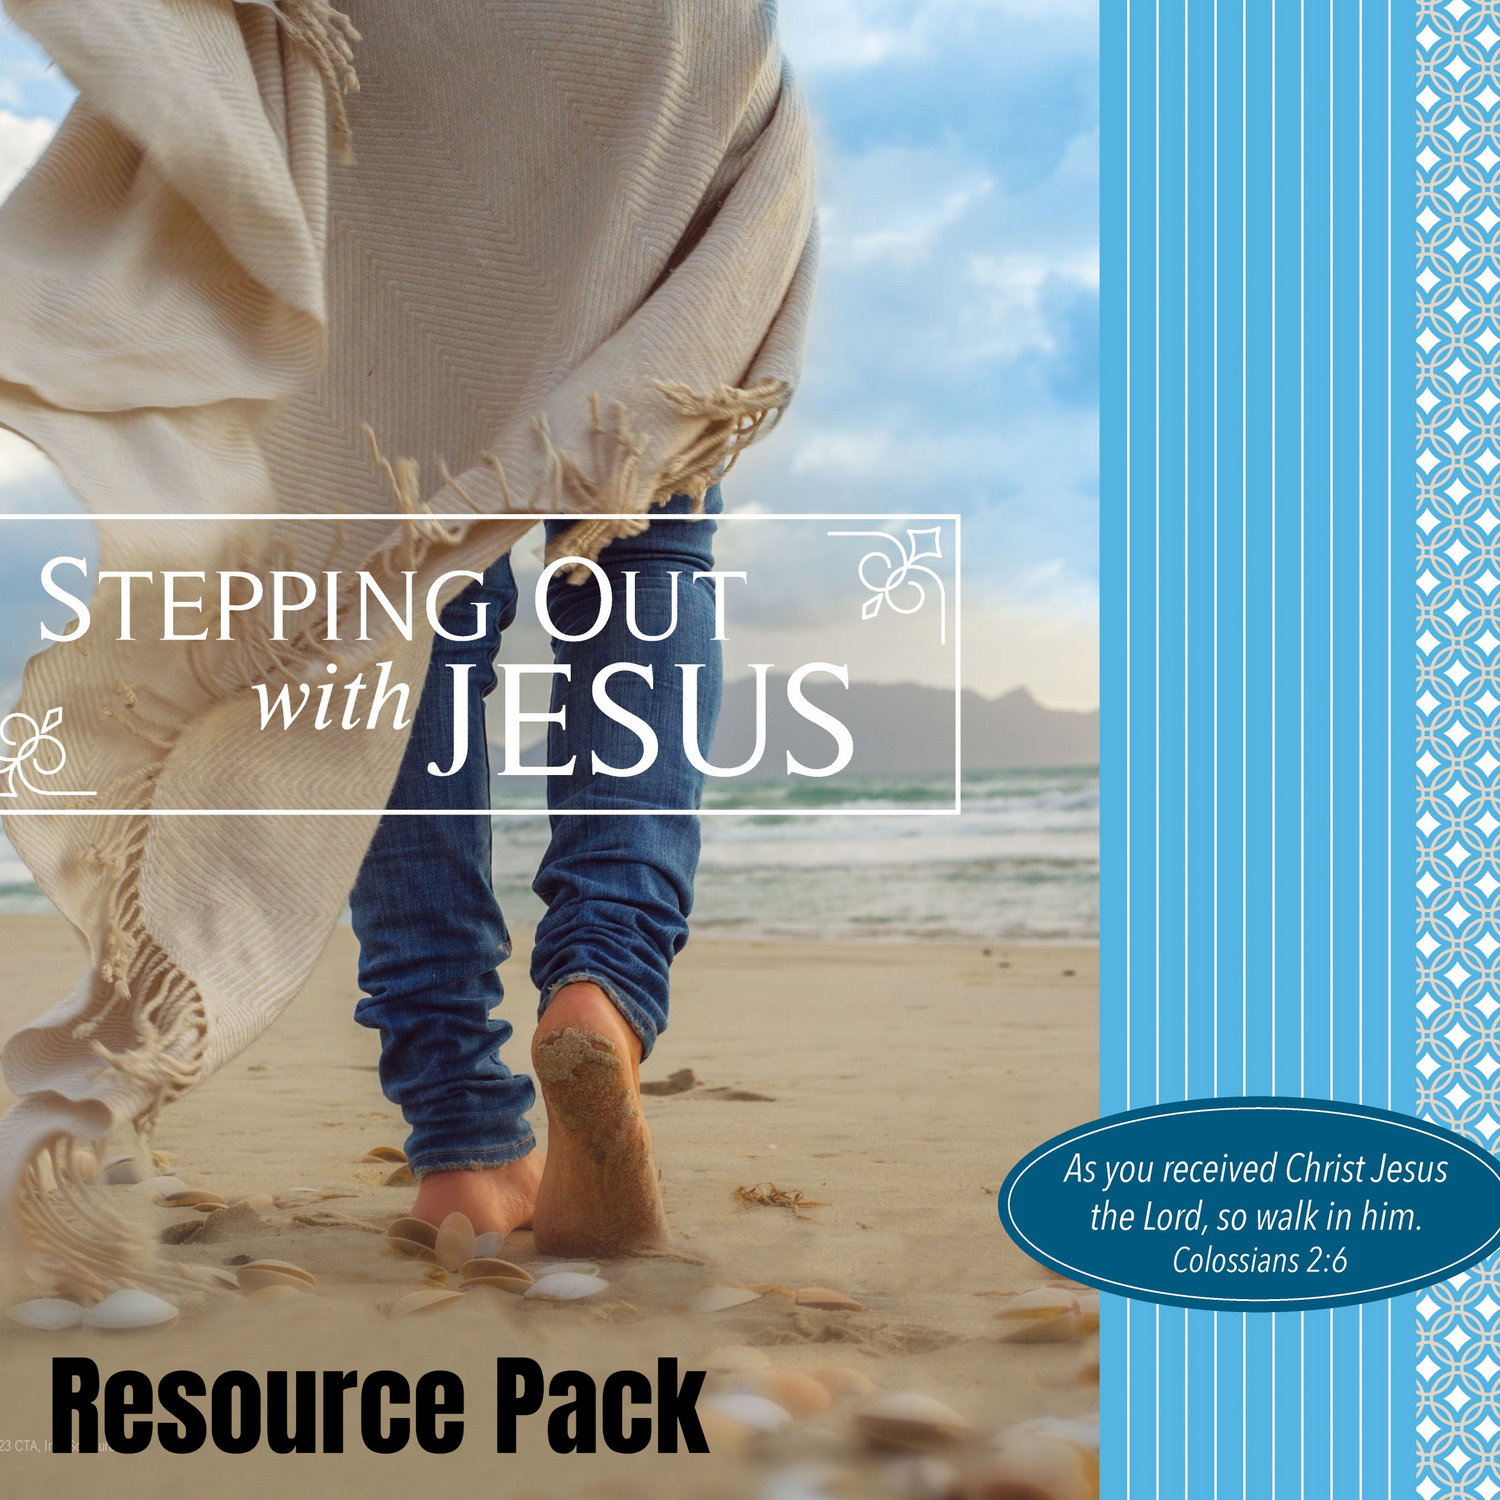 Resource Pack - Stepping Out with Jesus